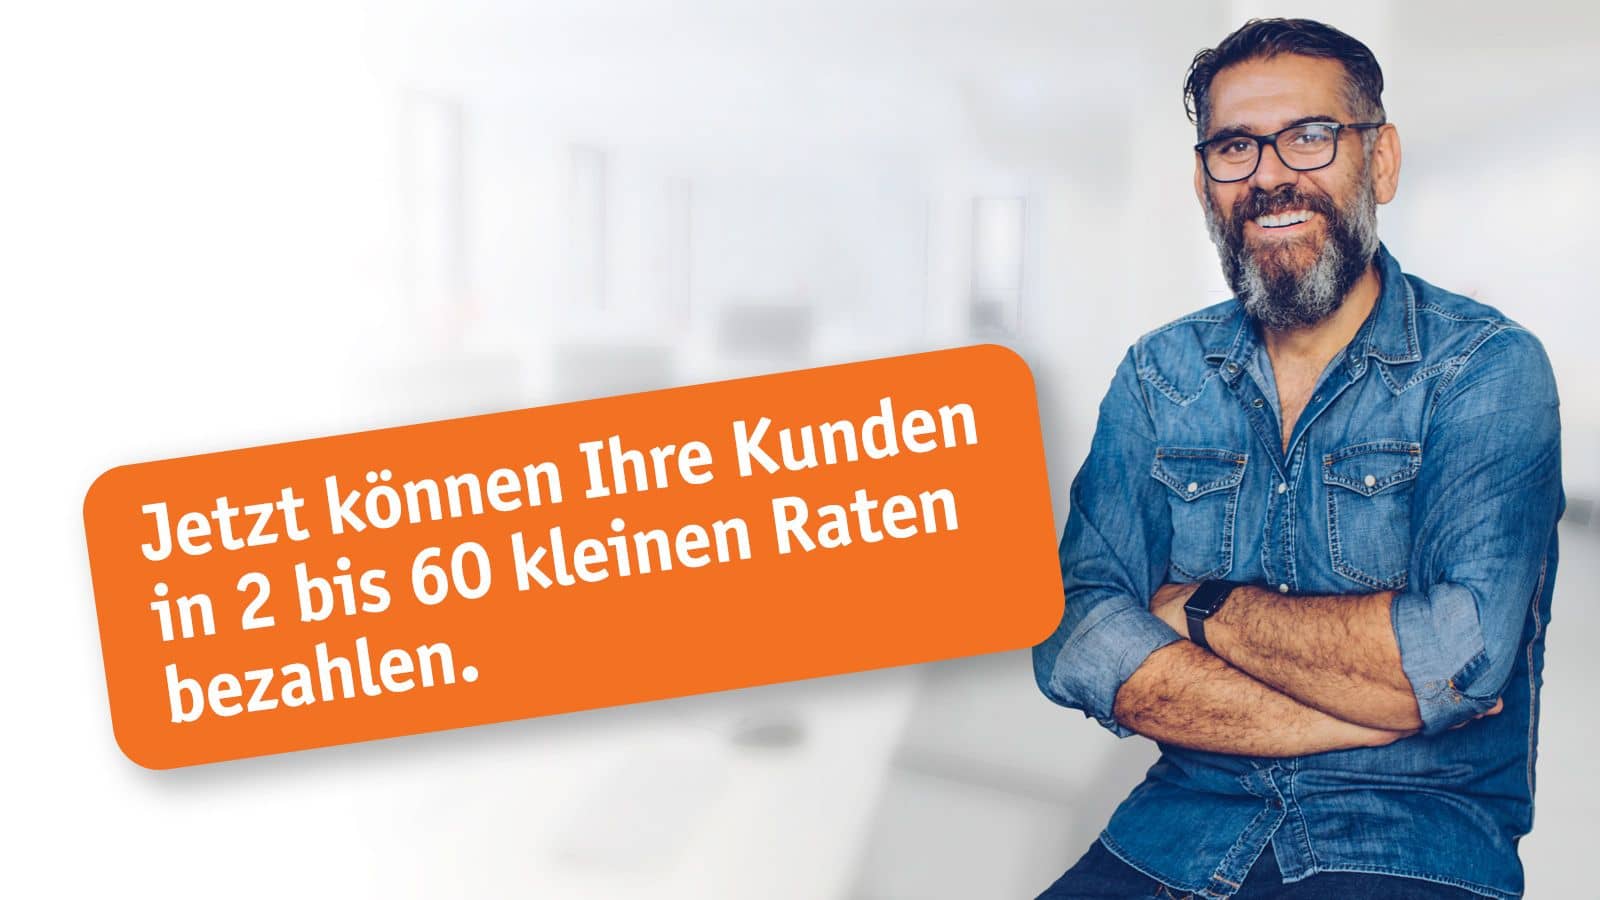 Ratenkauf By Easycredit Ecommerce Magazin 1600x900 (2)